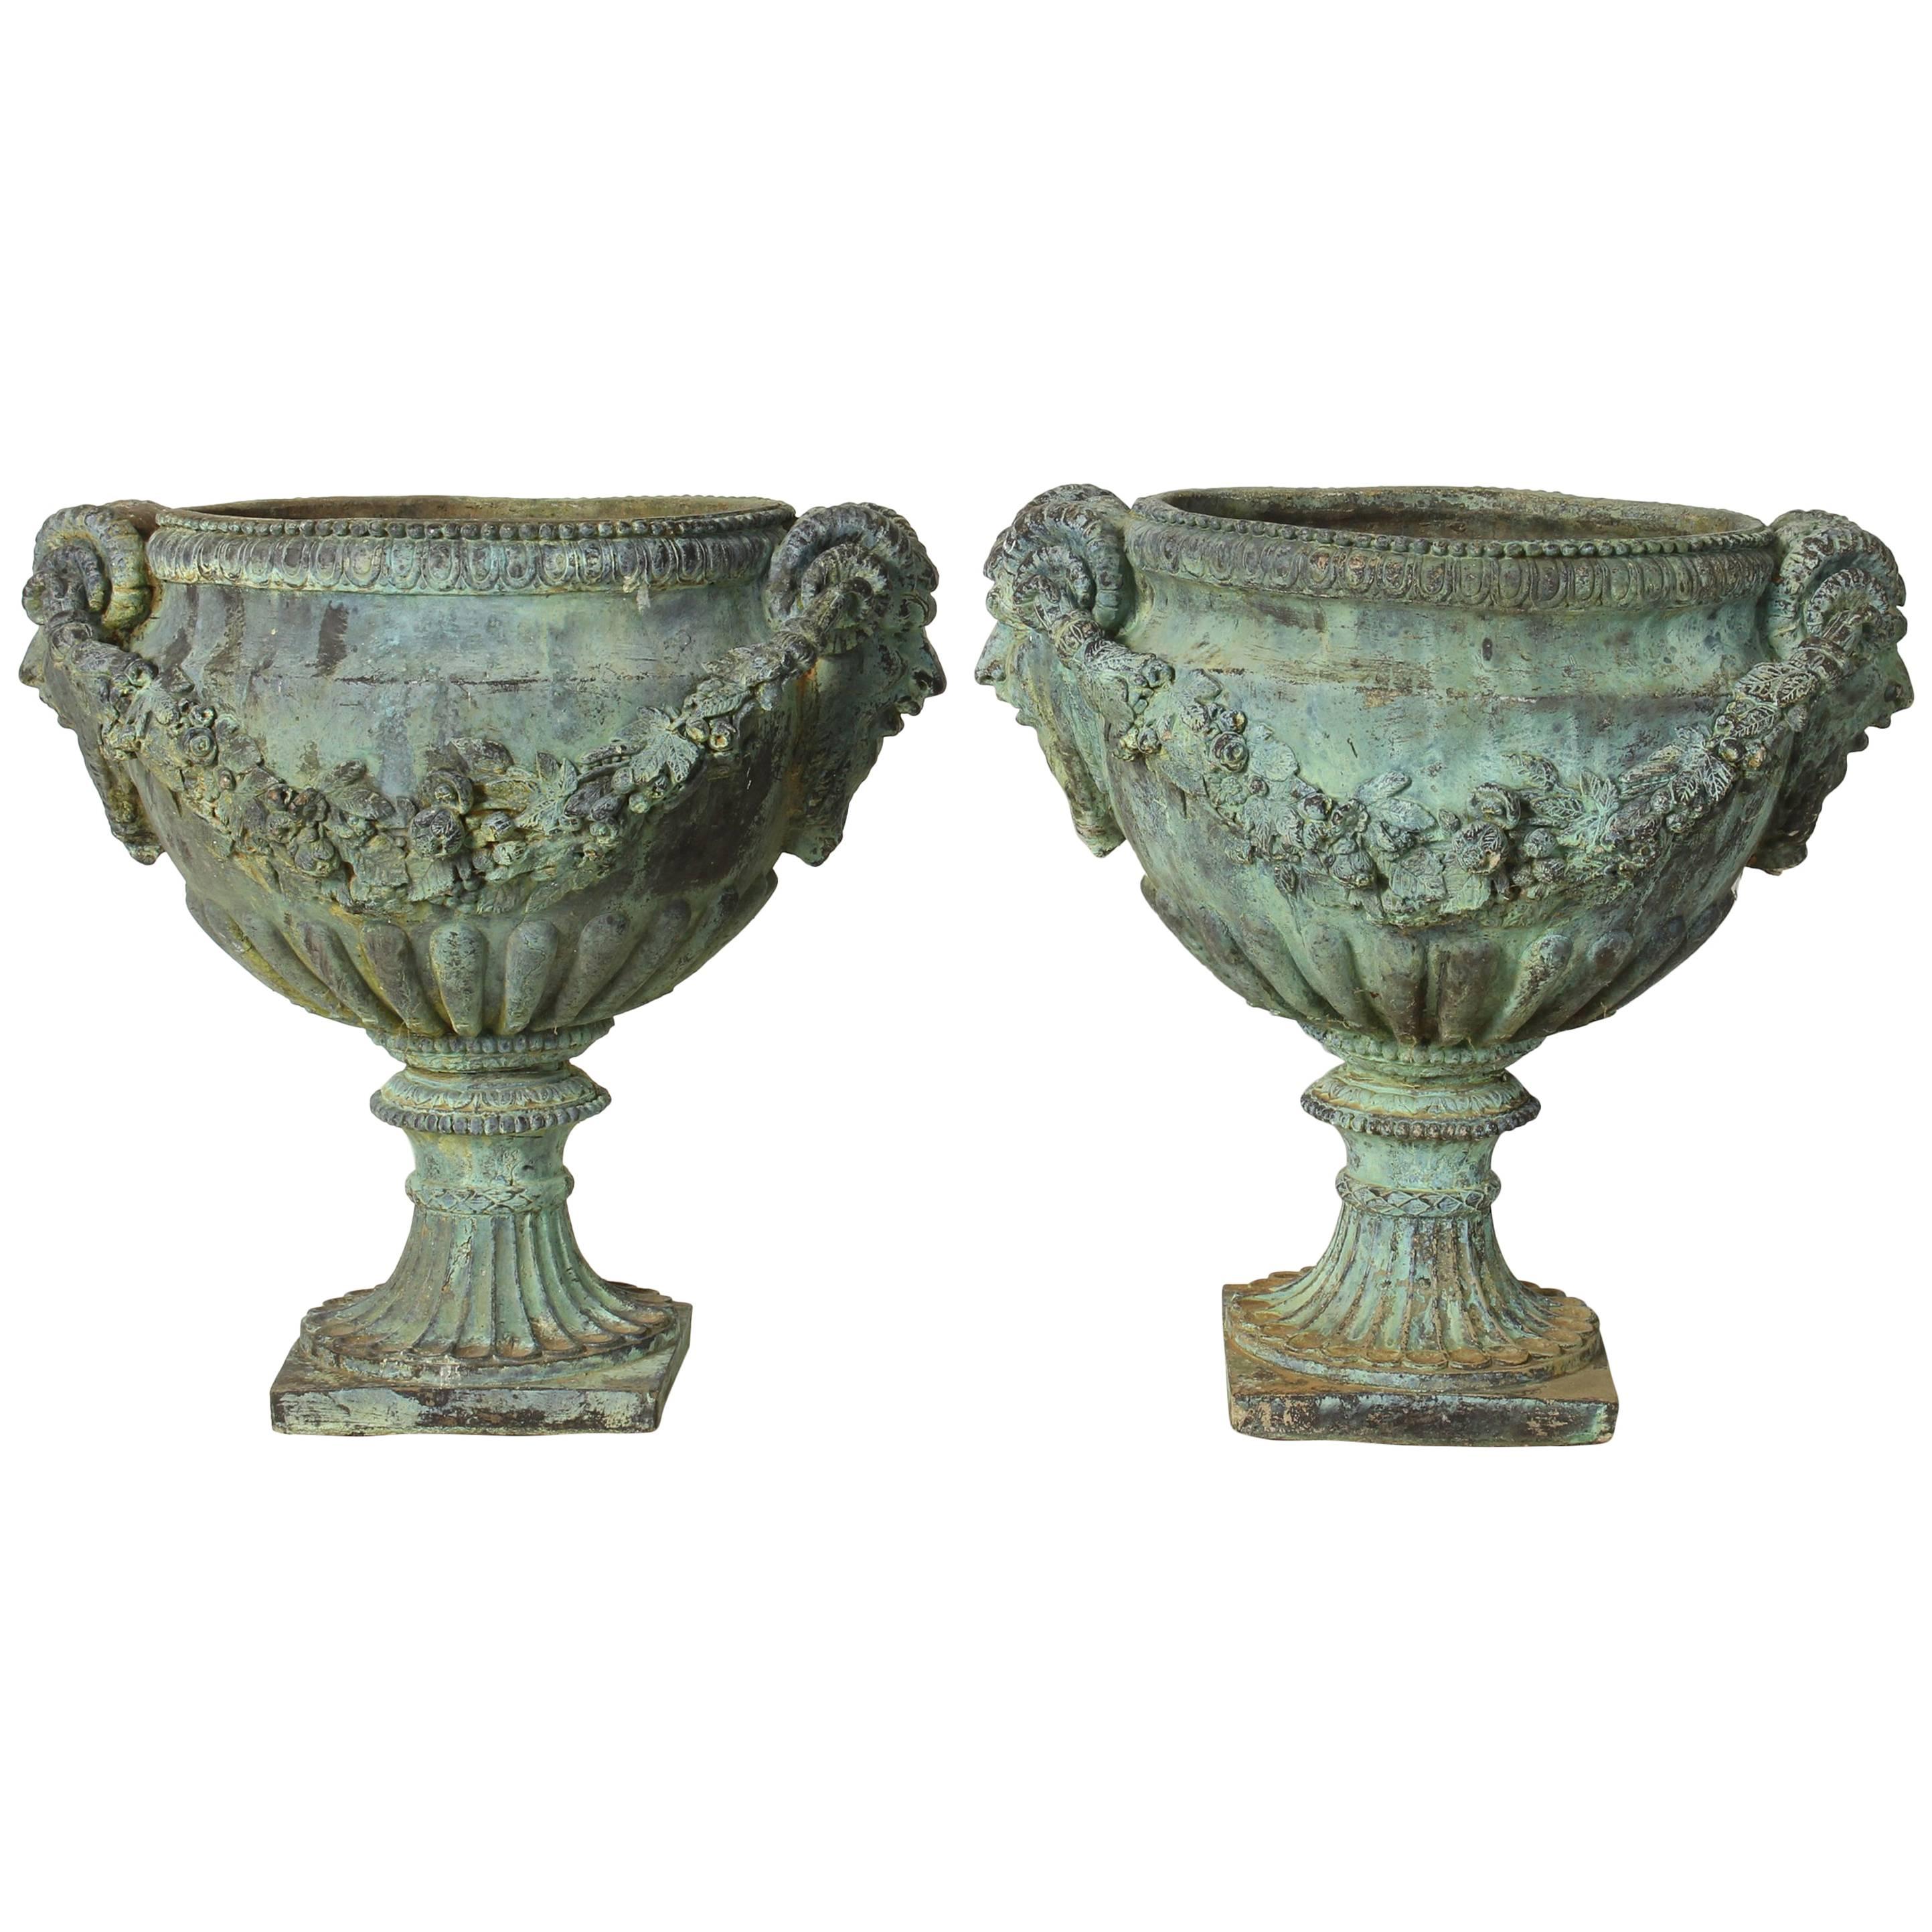 Pair of Classically Inspired Urns For Sale